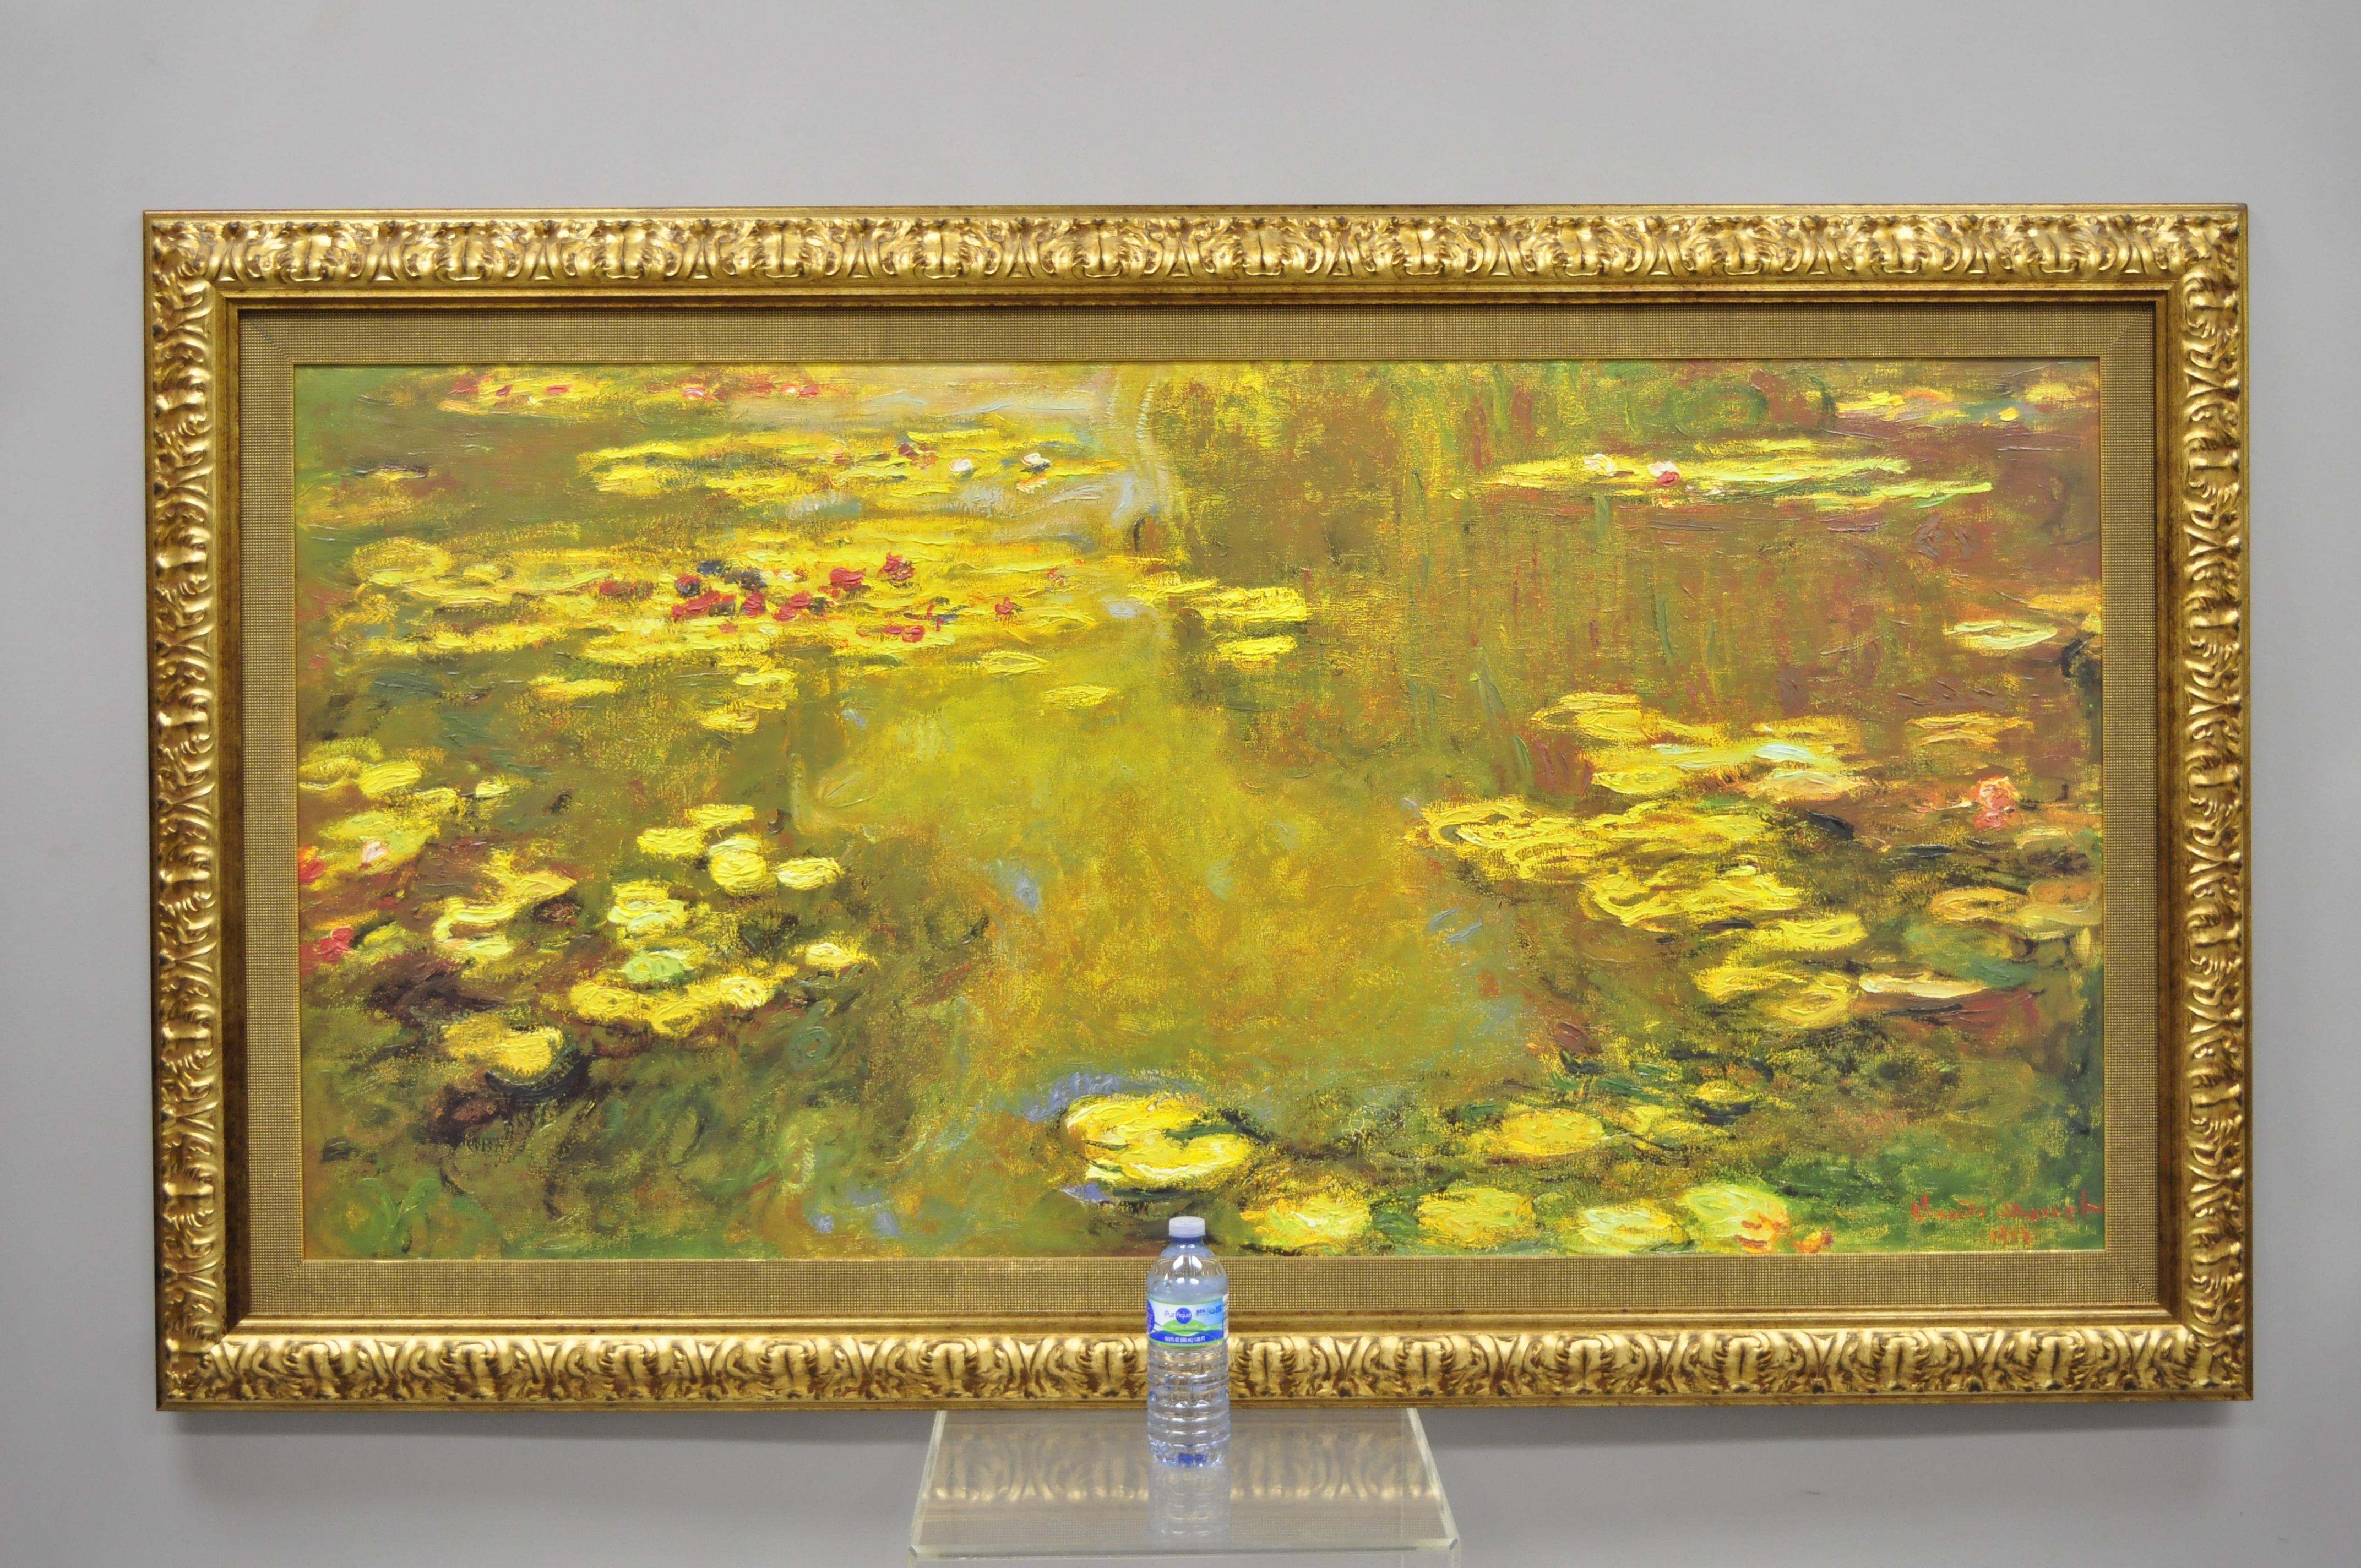 Museum Brushstrokes collection large Claude Monet pond of water lilies oil on canvas painting. Item features Large gold open style frame, oil reproduction done on canvas with hand applied brushstroke finish, hand finished by artist, from the